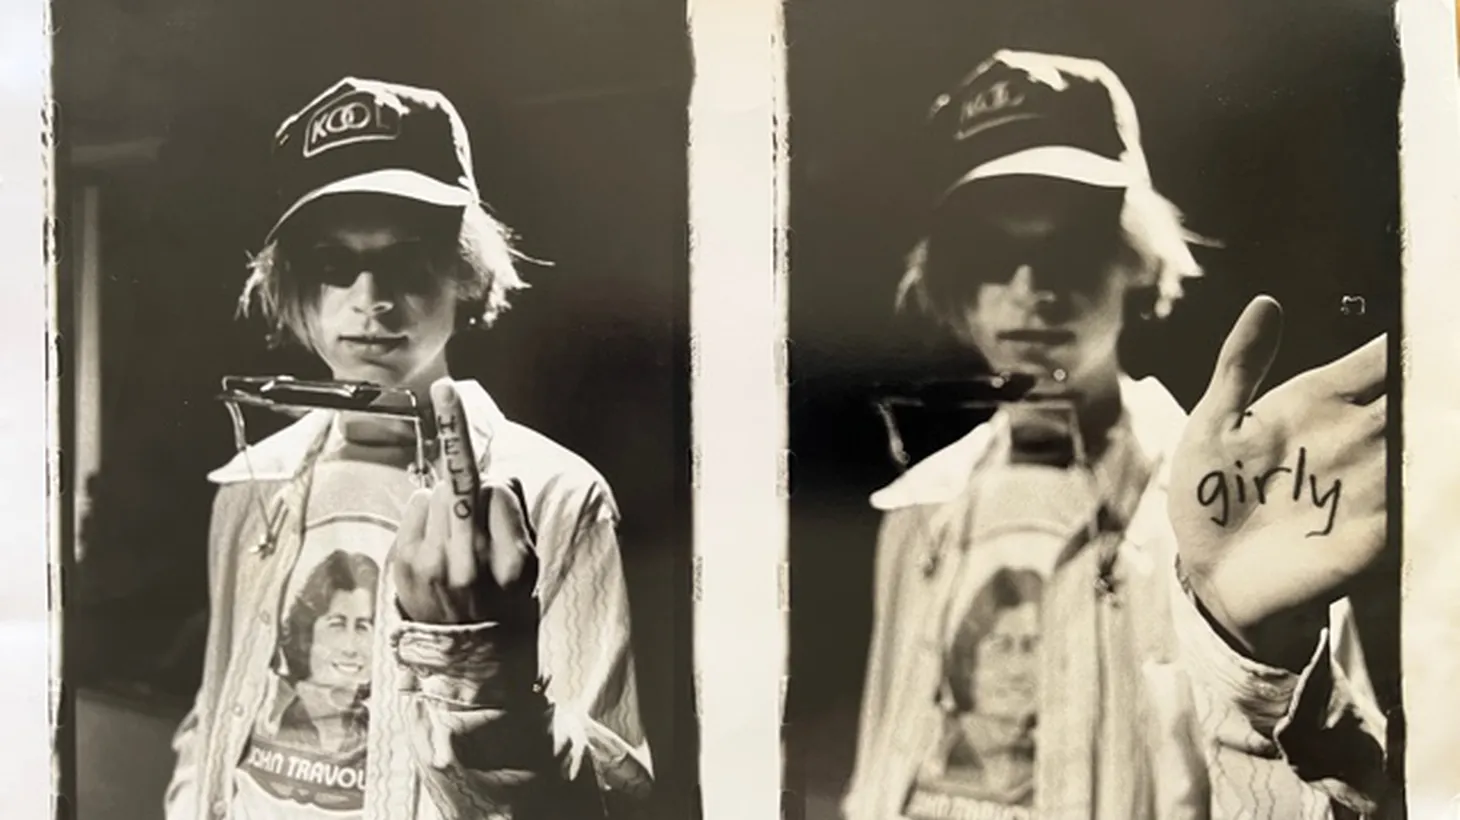 Beck in studio at KCRW in the 1990s.